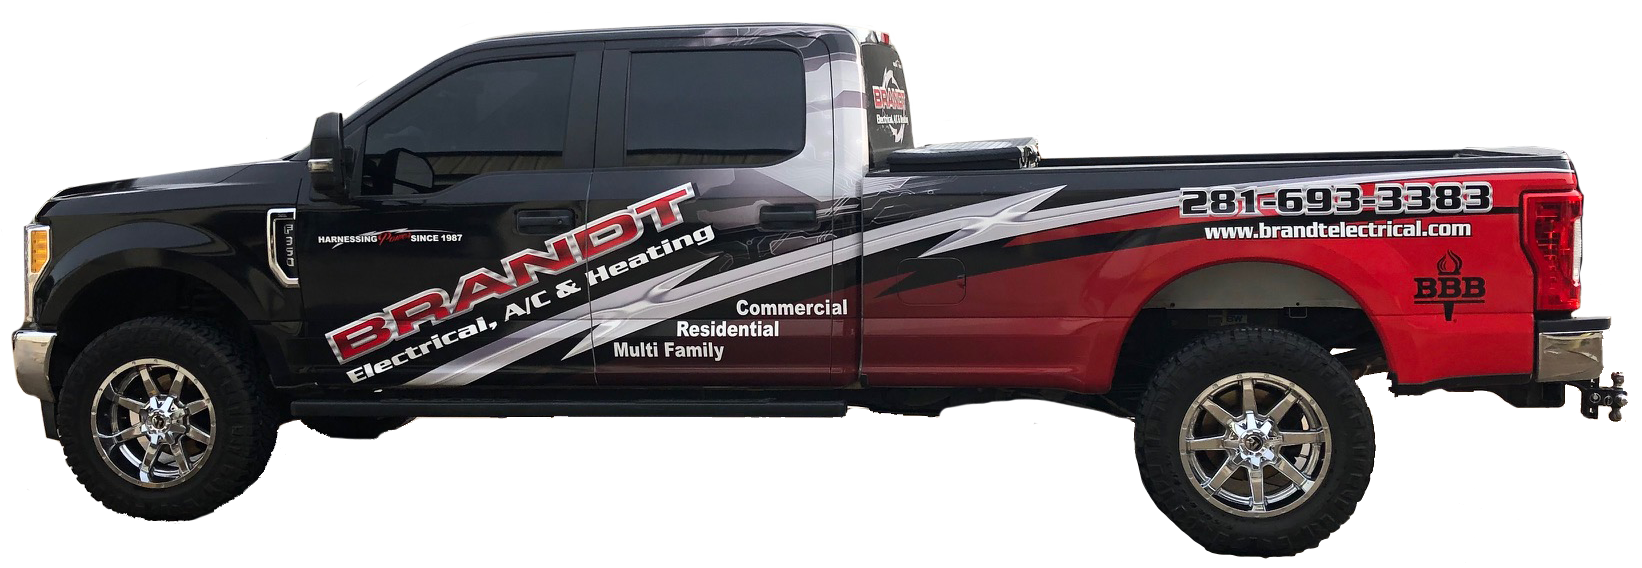 Brant Electrical Truck